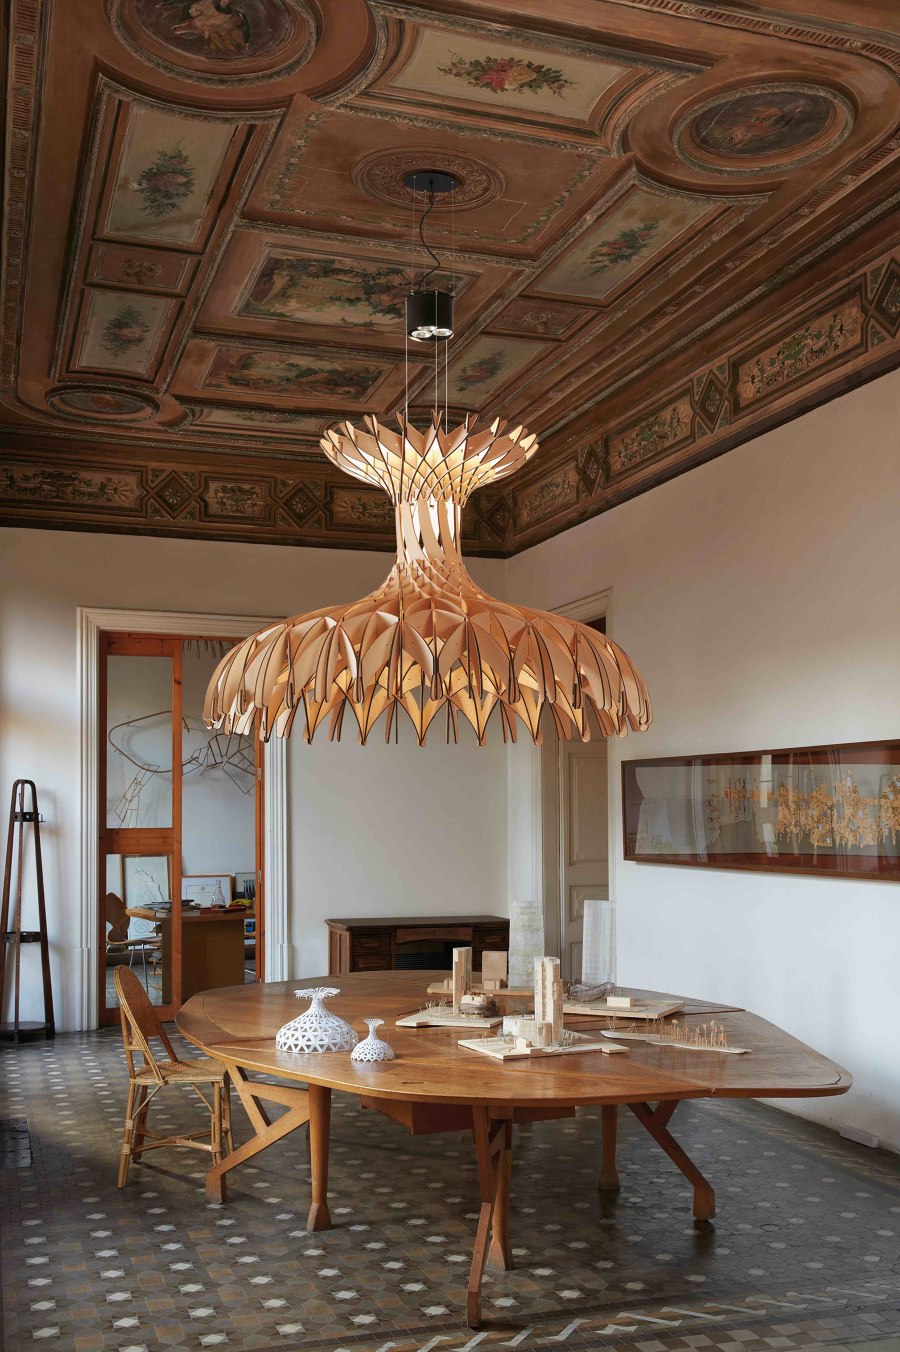 25 years of Mediterranean light from Bover | News